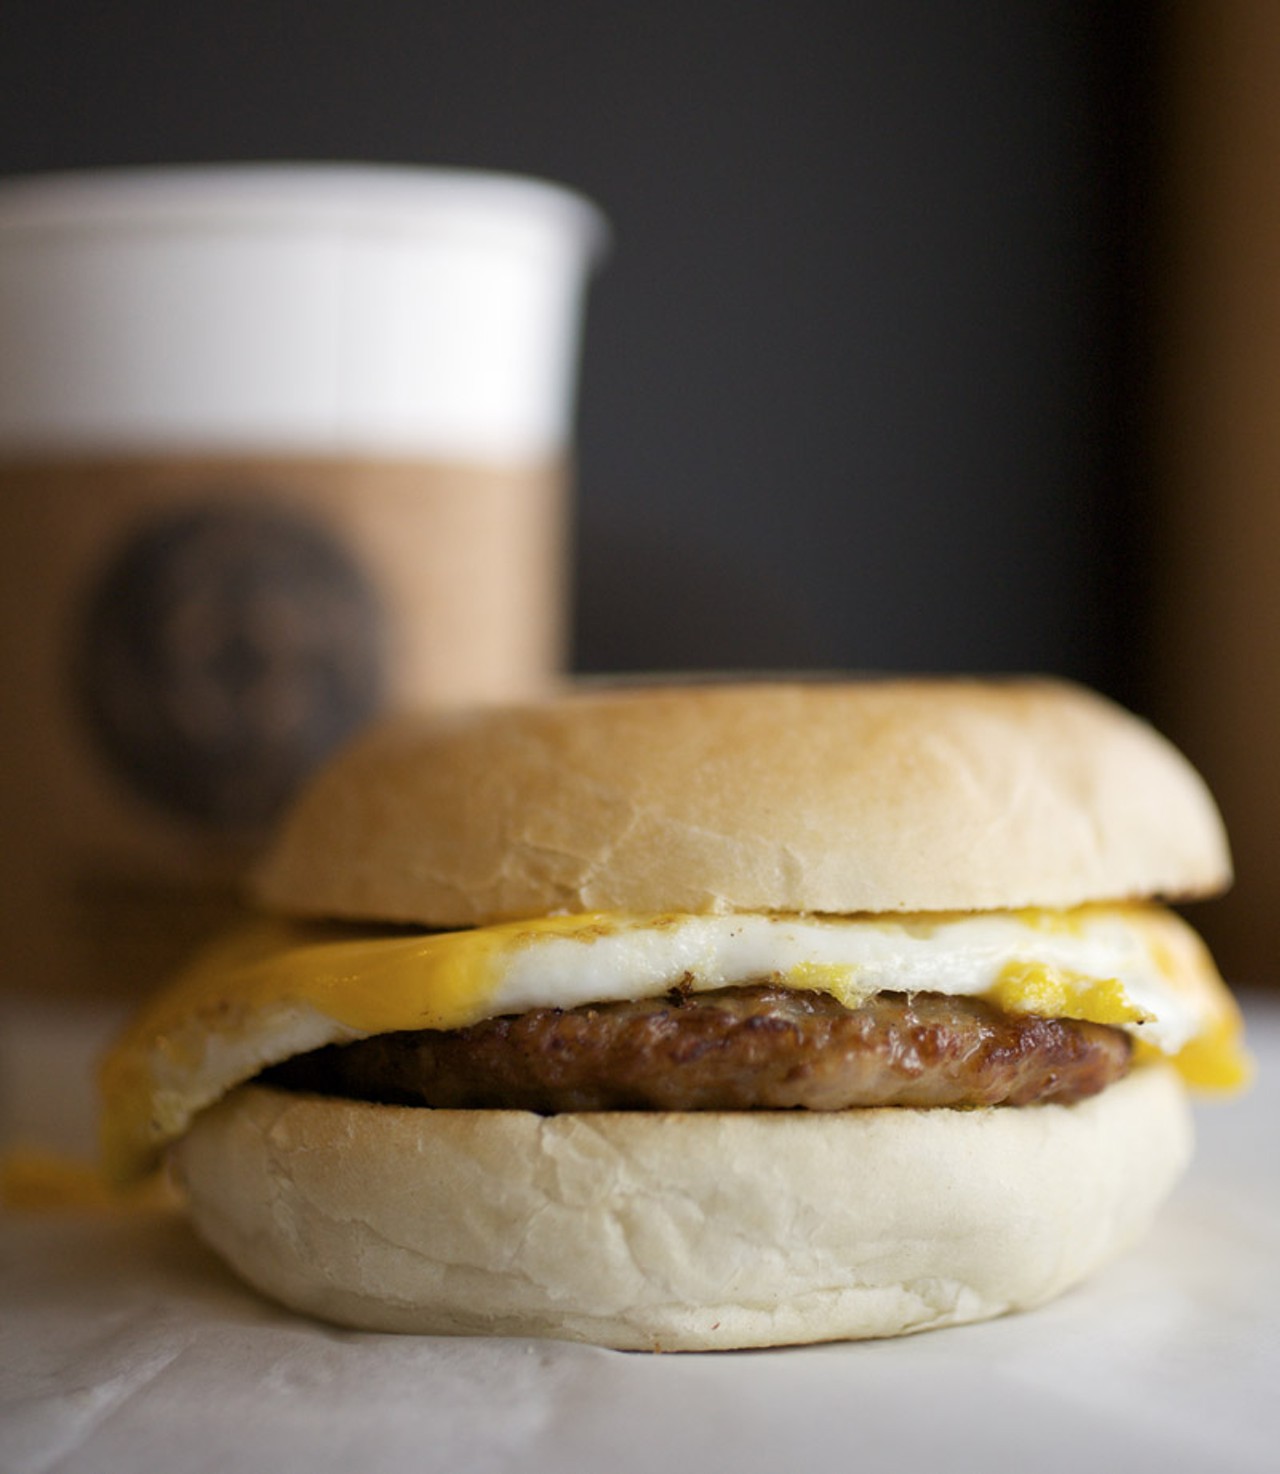 Nora's is not just a lunch spot. For breakfast you can order a sausage, egg and cheese bagel with a cappuccino brewed with Kaldi's coffee.